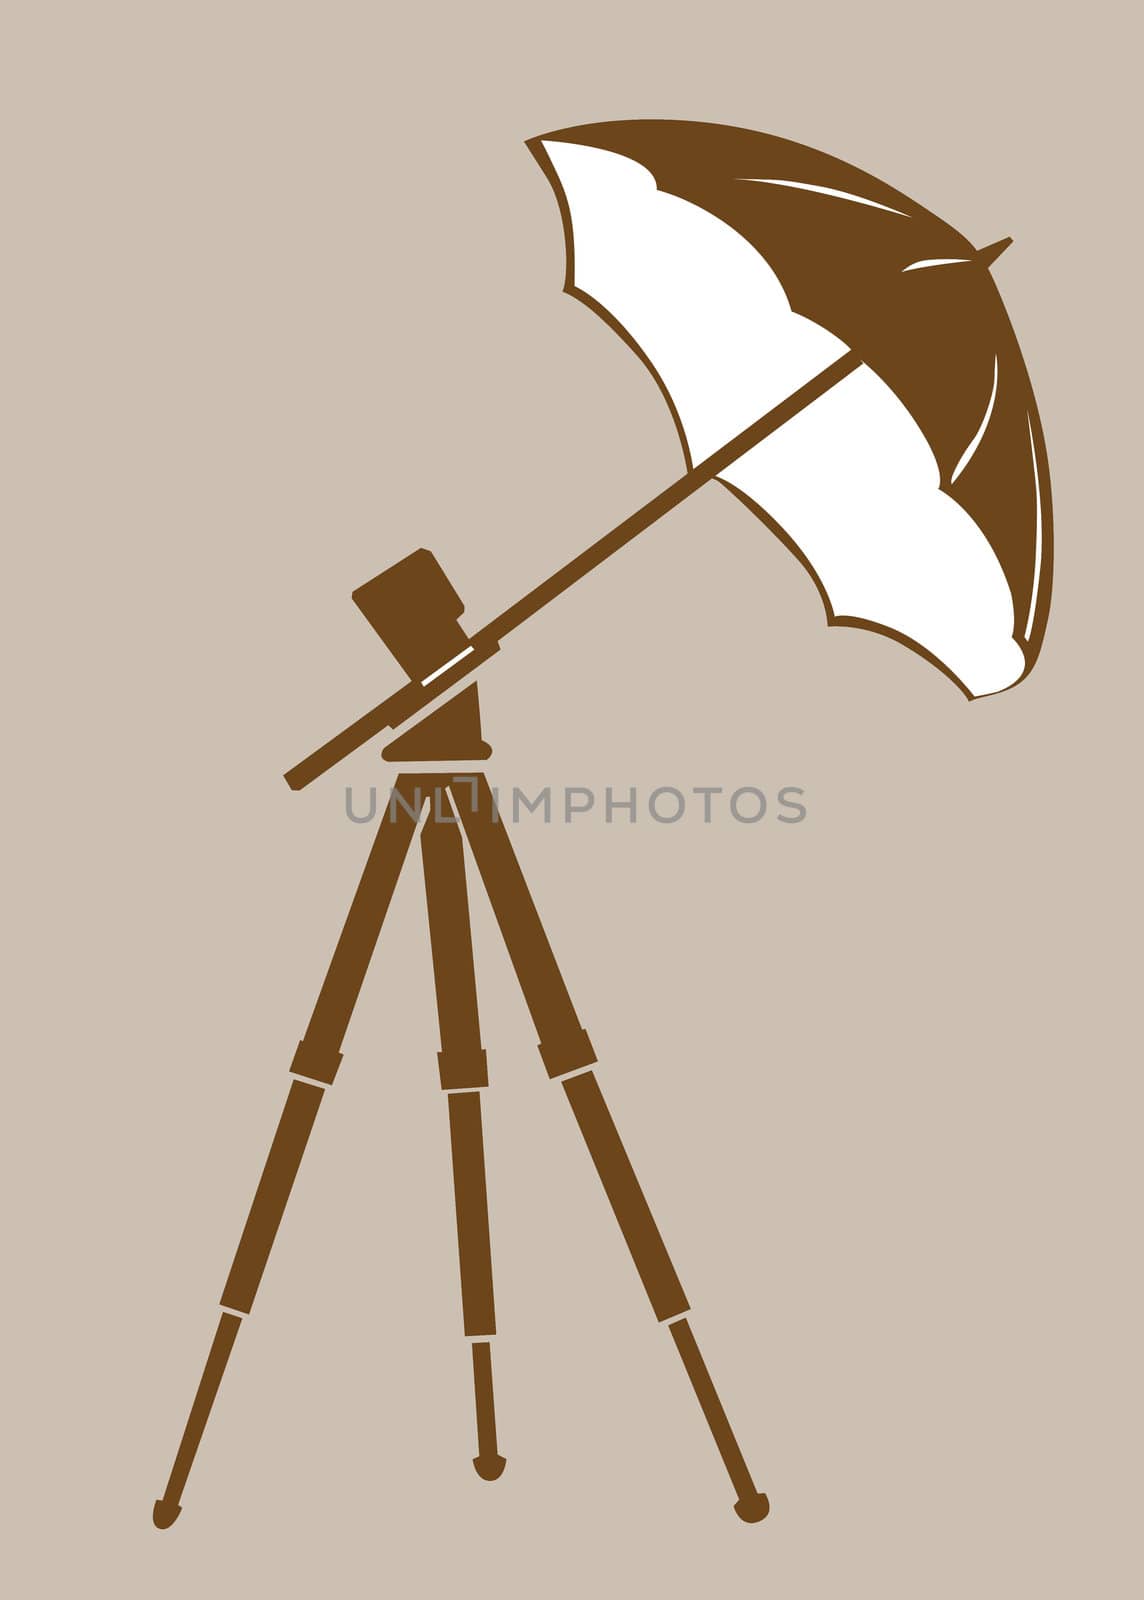 tripod silhouette on brown background by basel101658